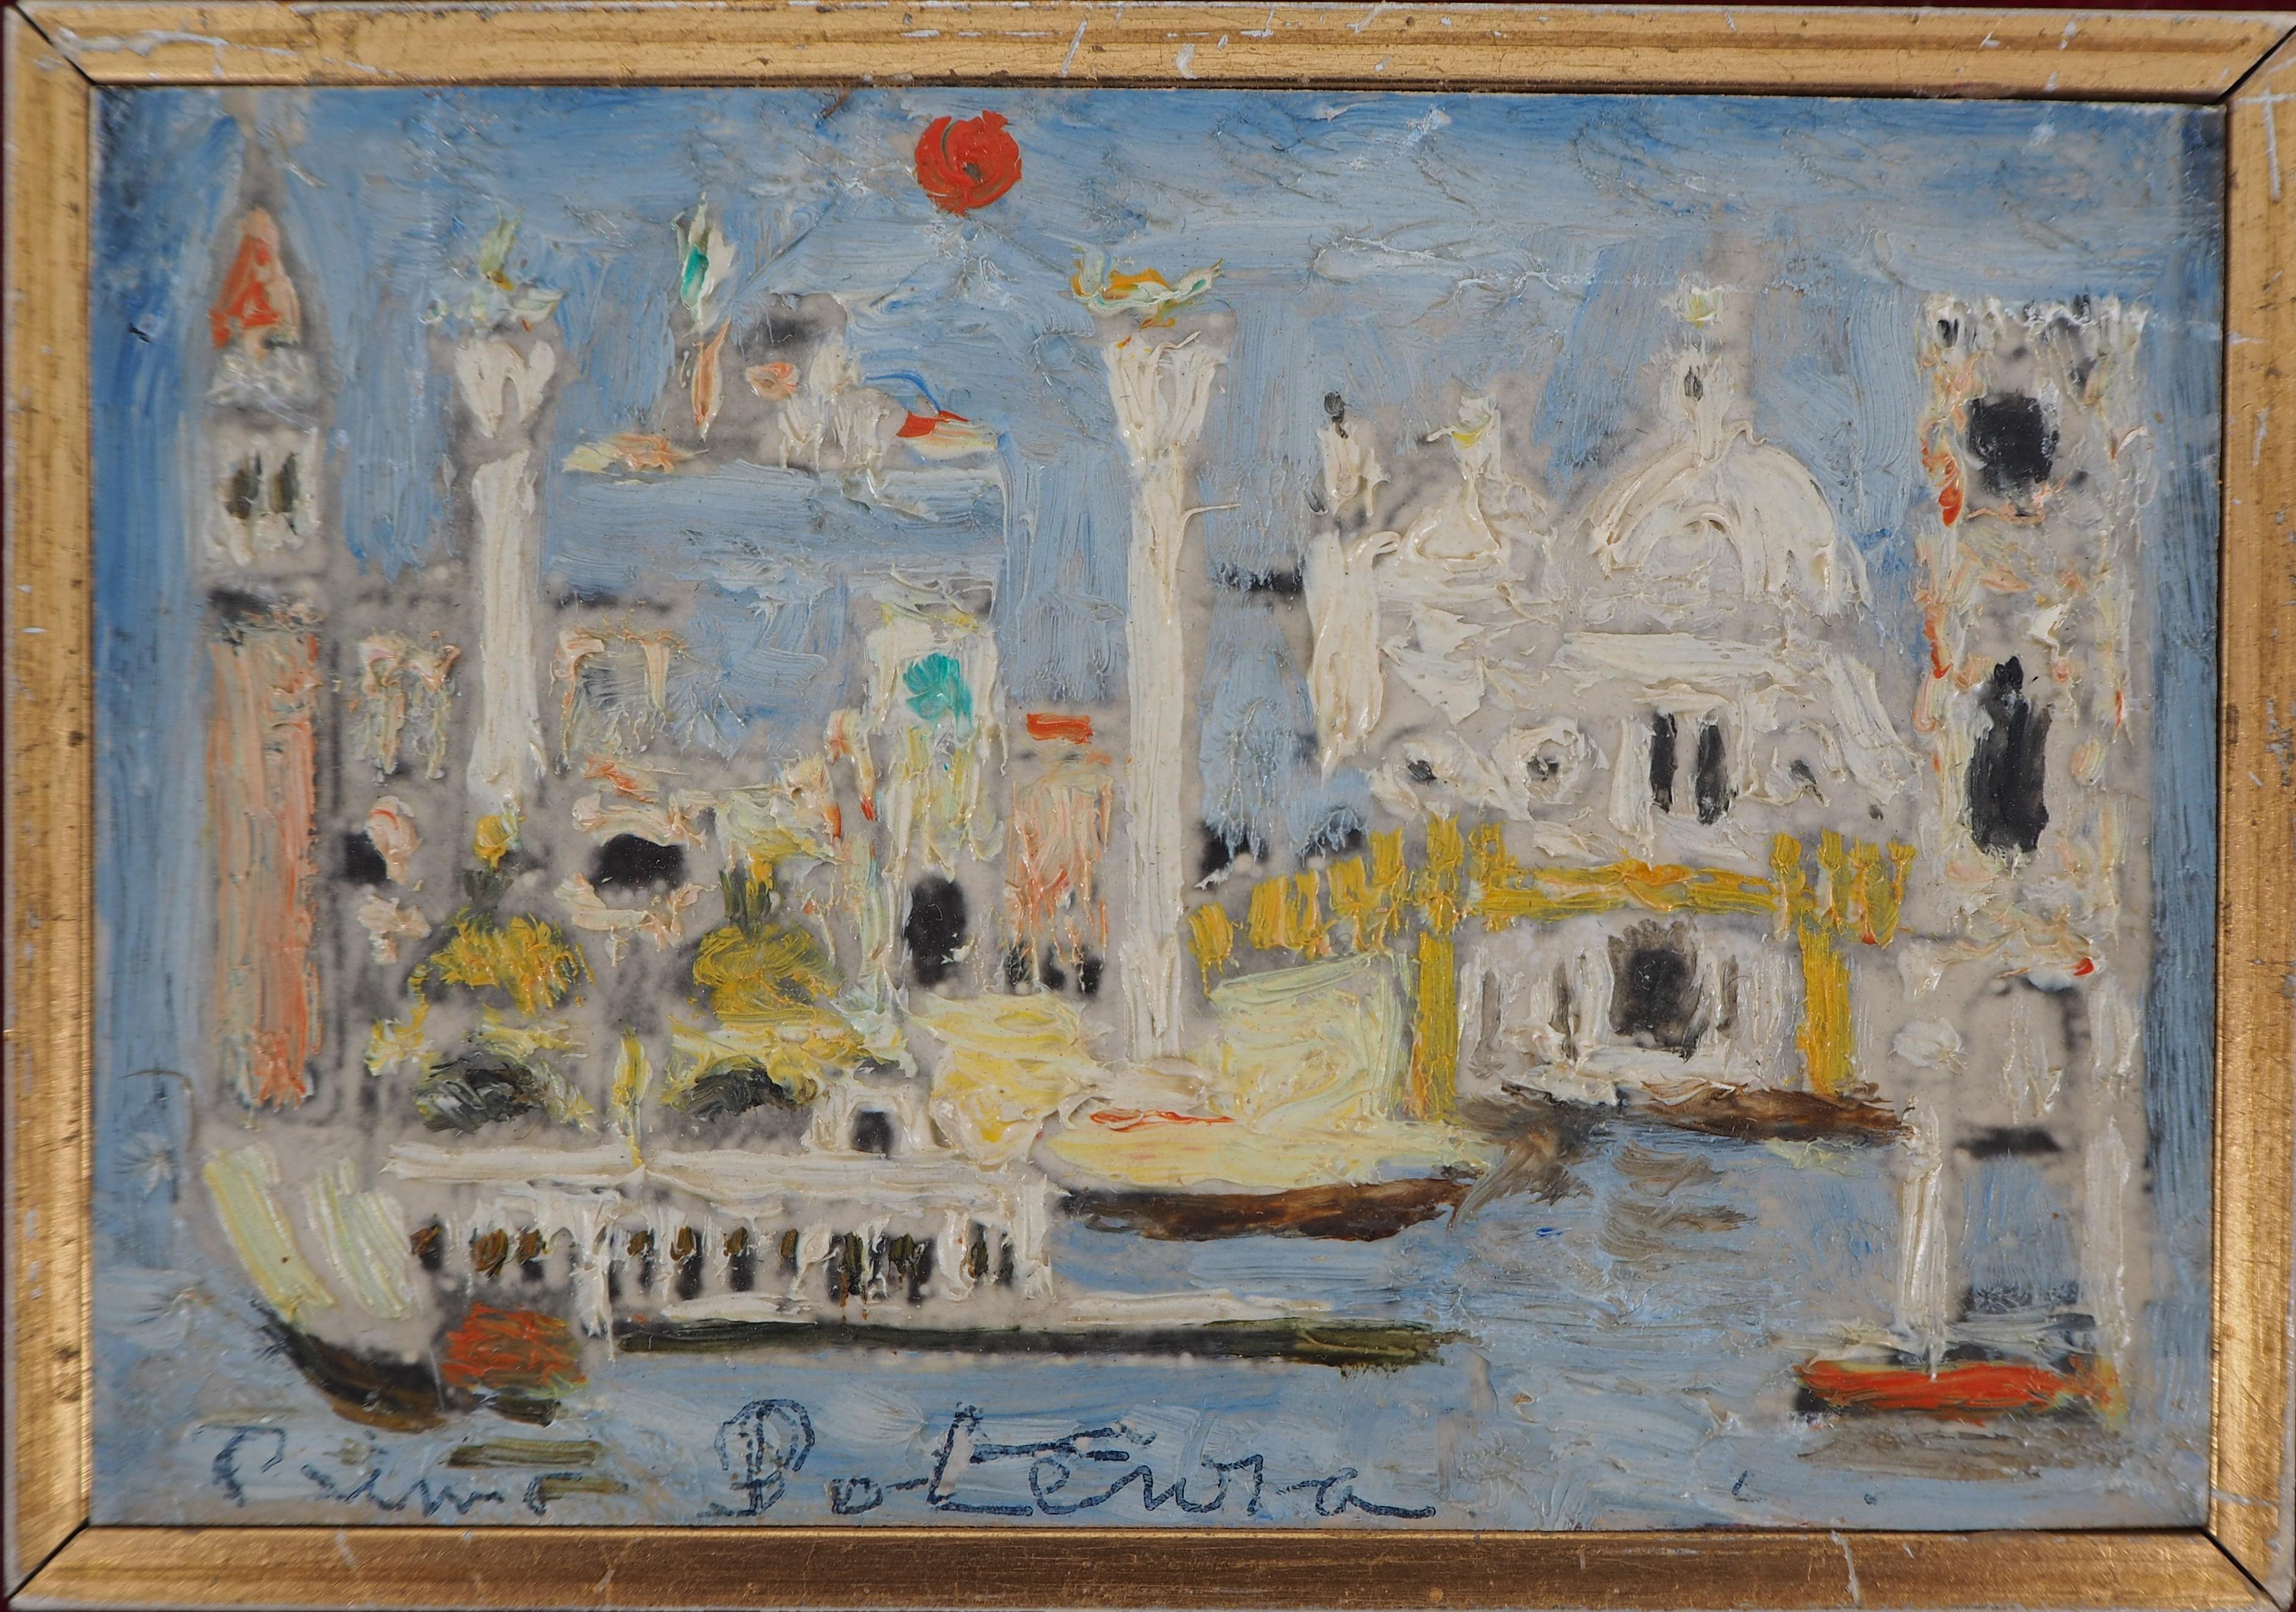 Primo POTENZA Landscape Painting - Venice With Red Sun - Original Oil Painting, Handsigned